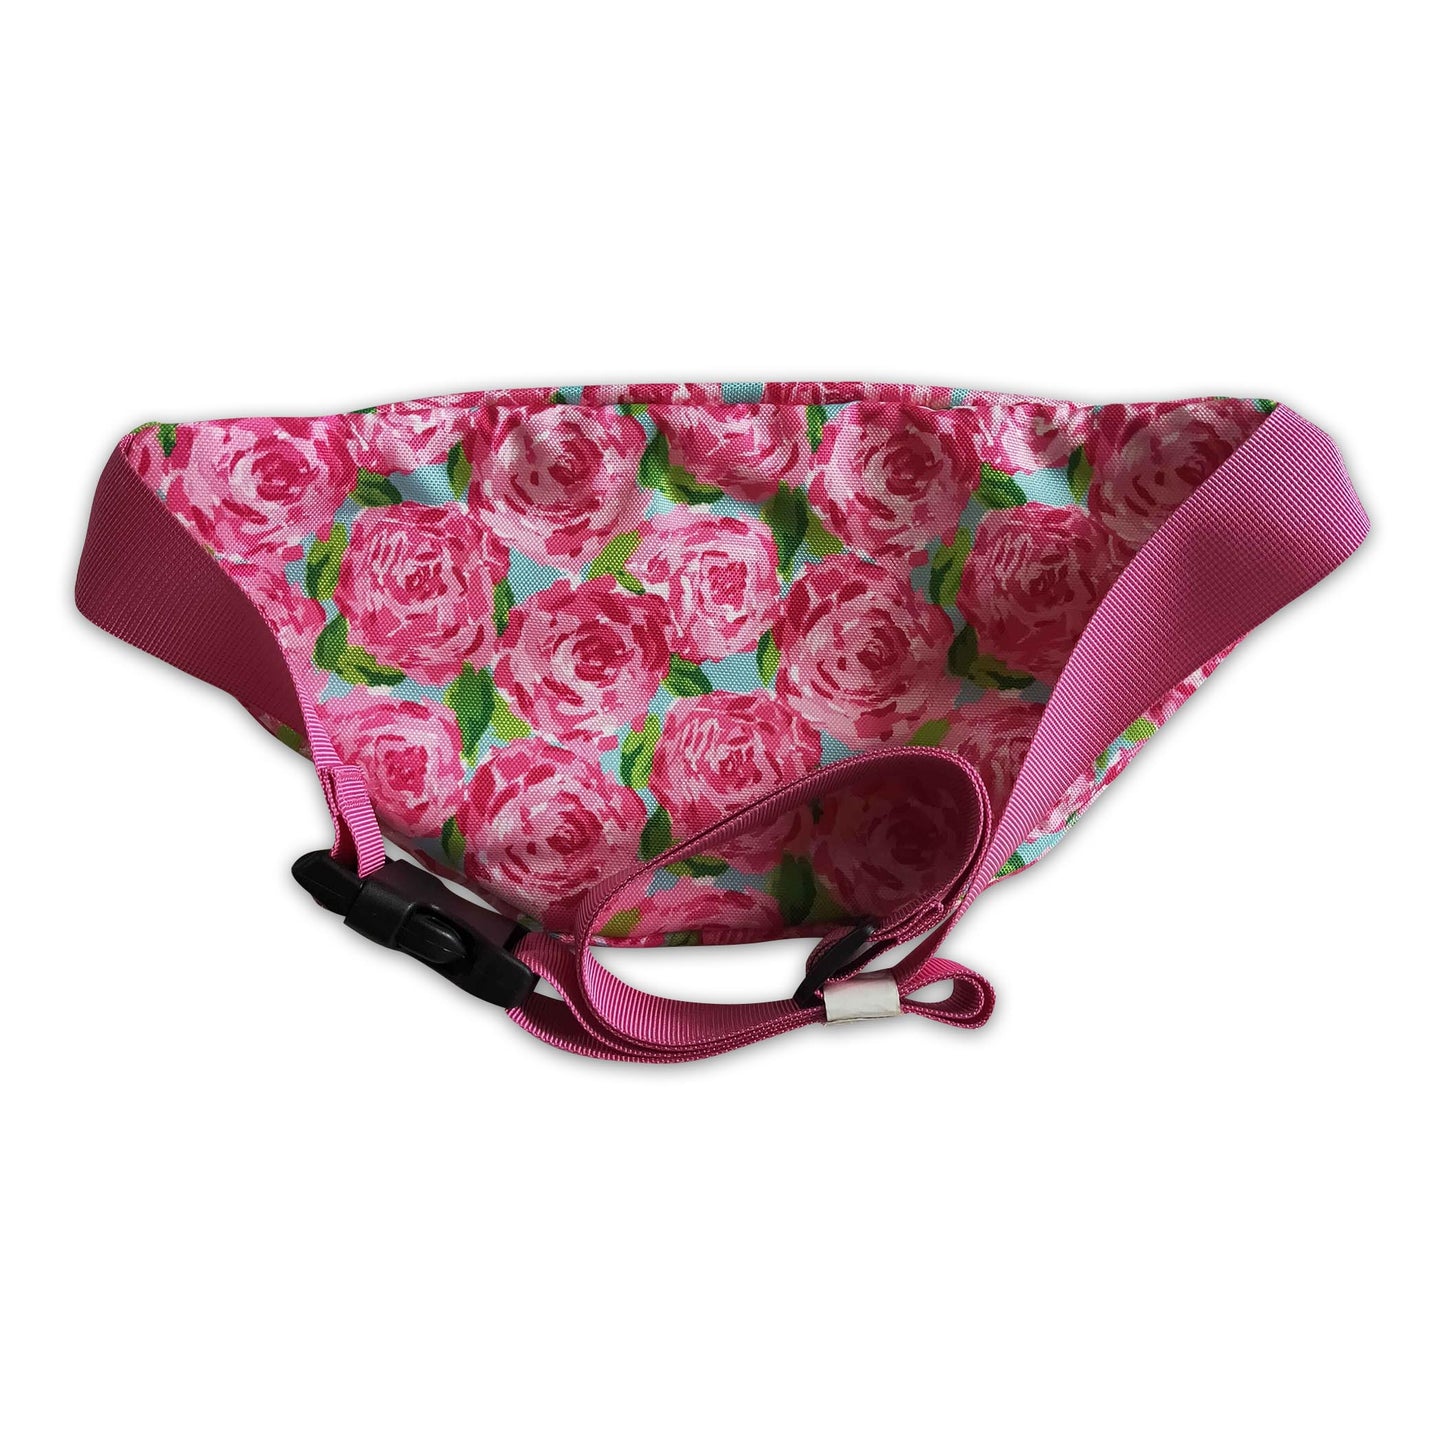 Hot pink floral kids girls small bags